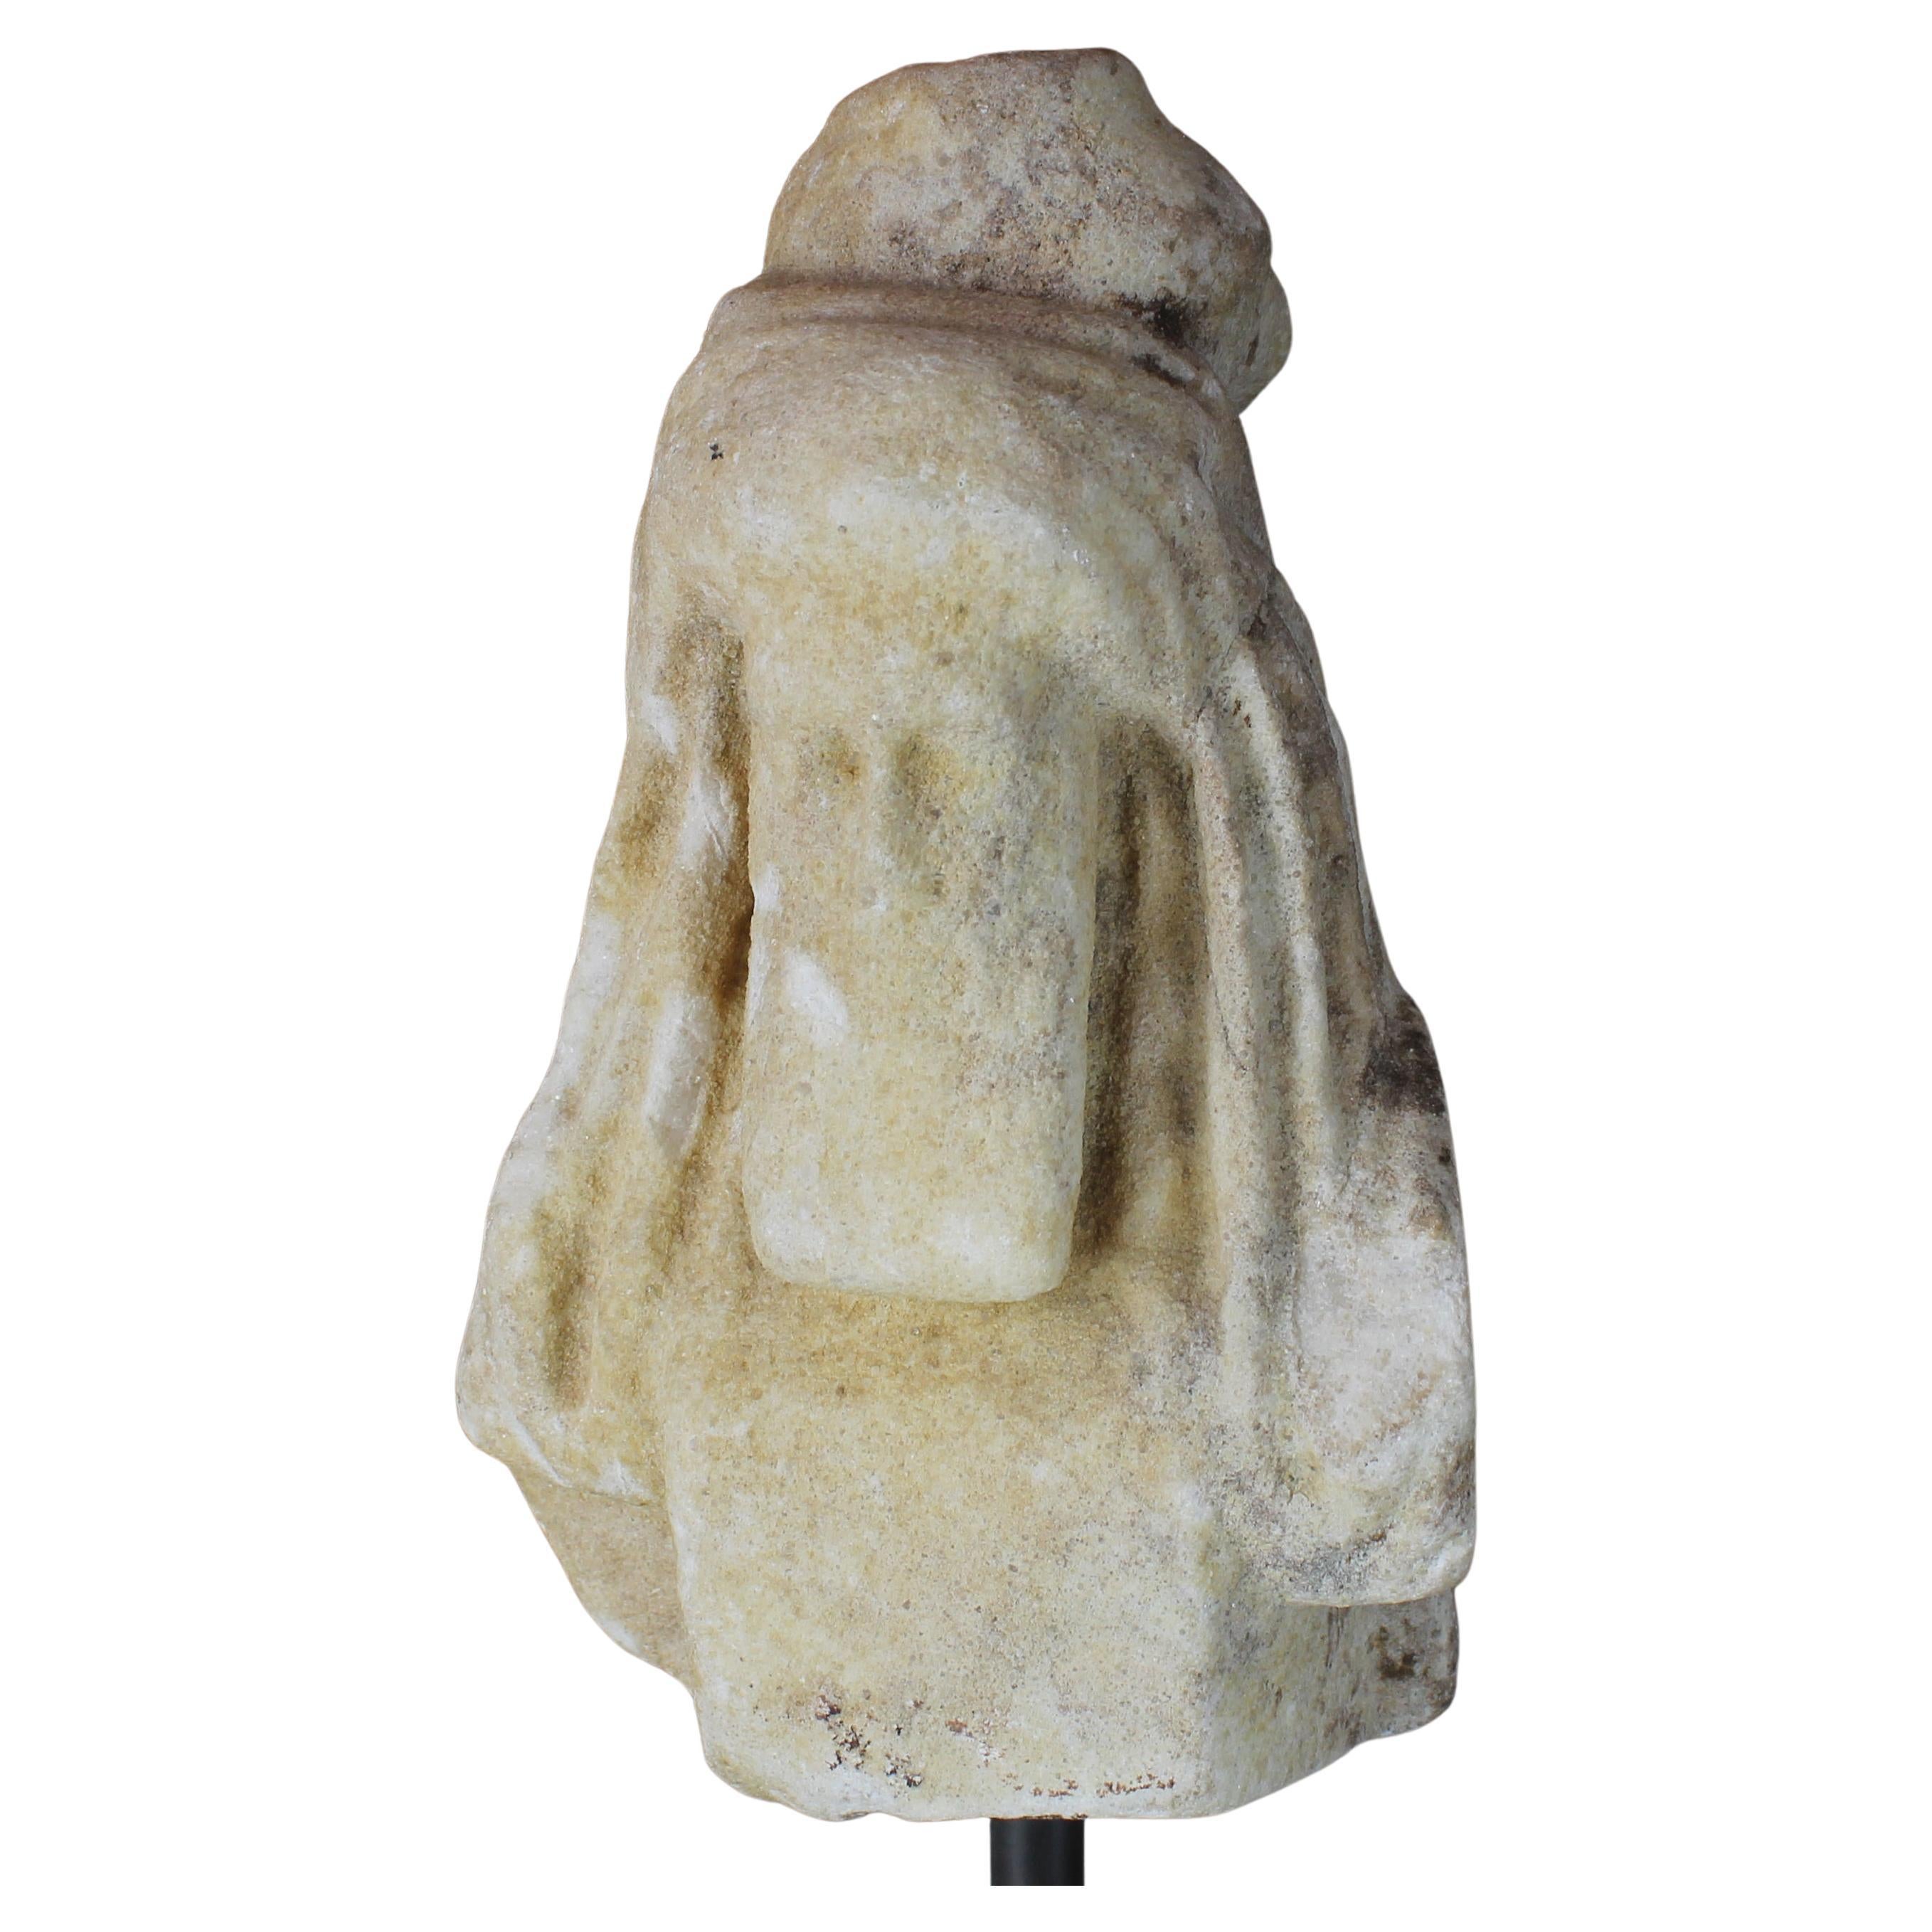 Roman statuette of Dionysos with hand over his head